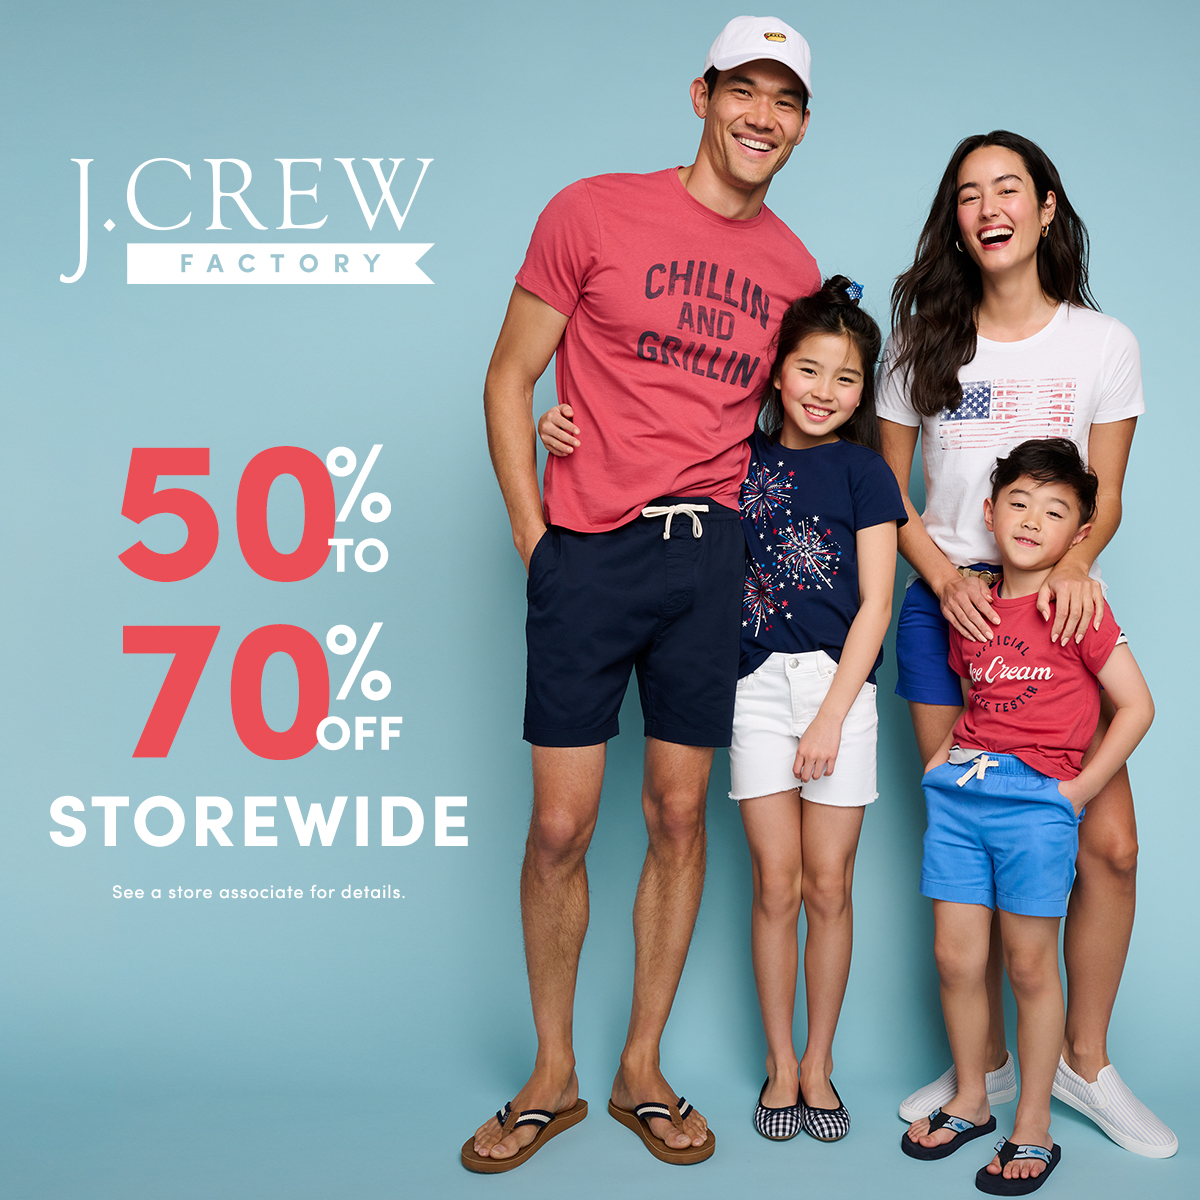 About J.Crew Factory